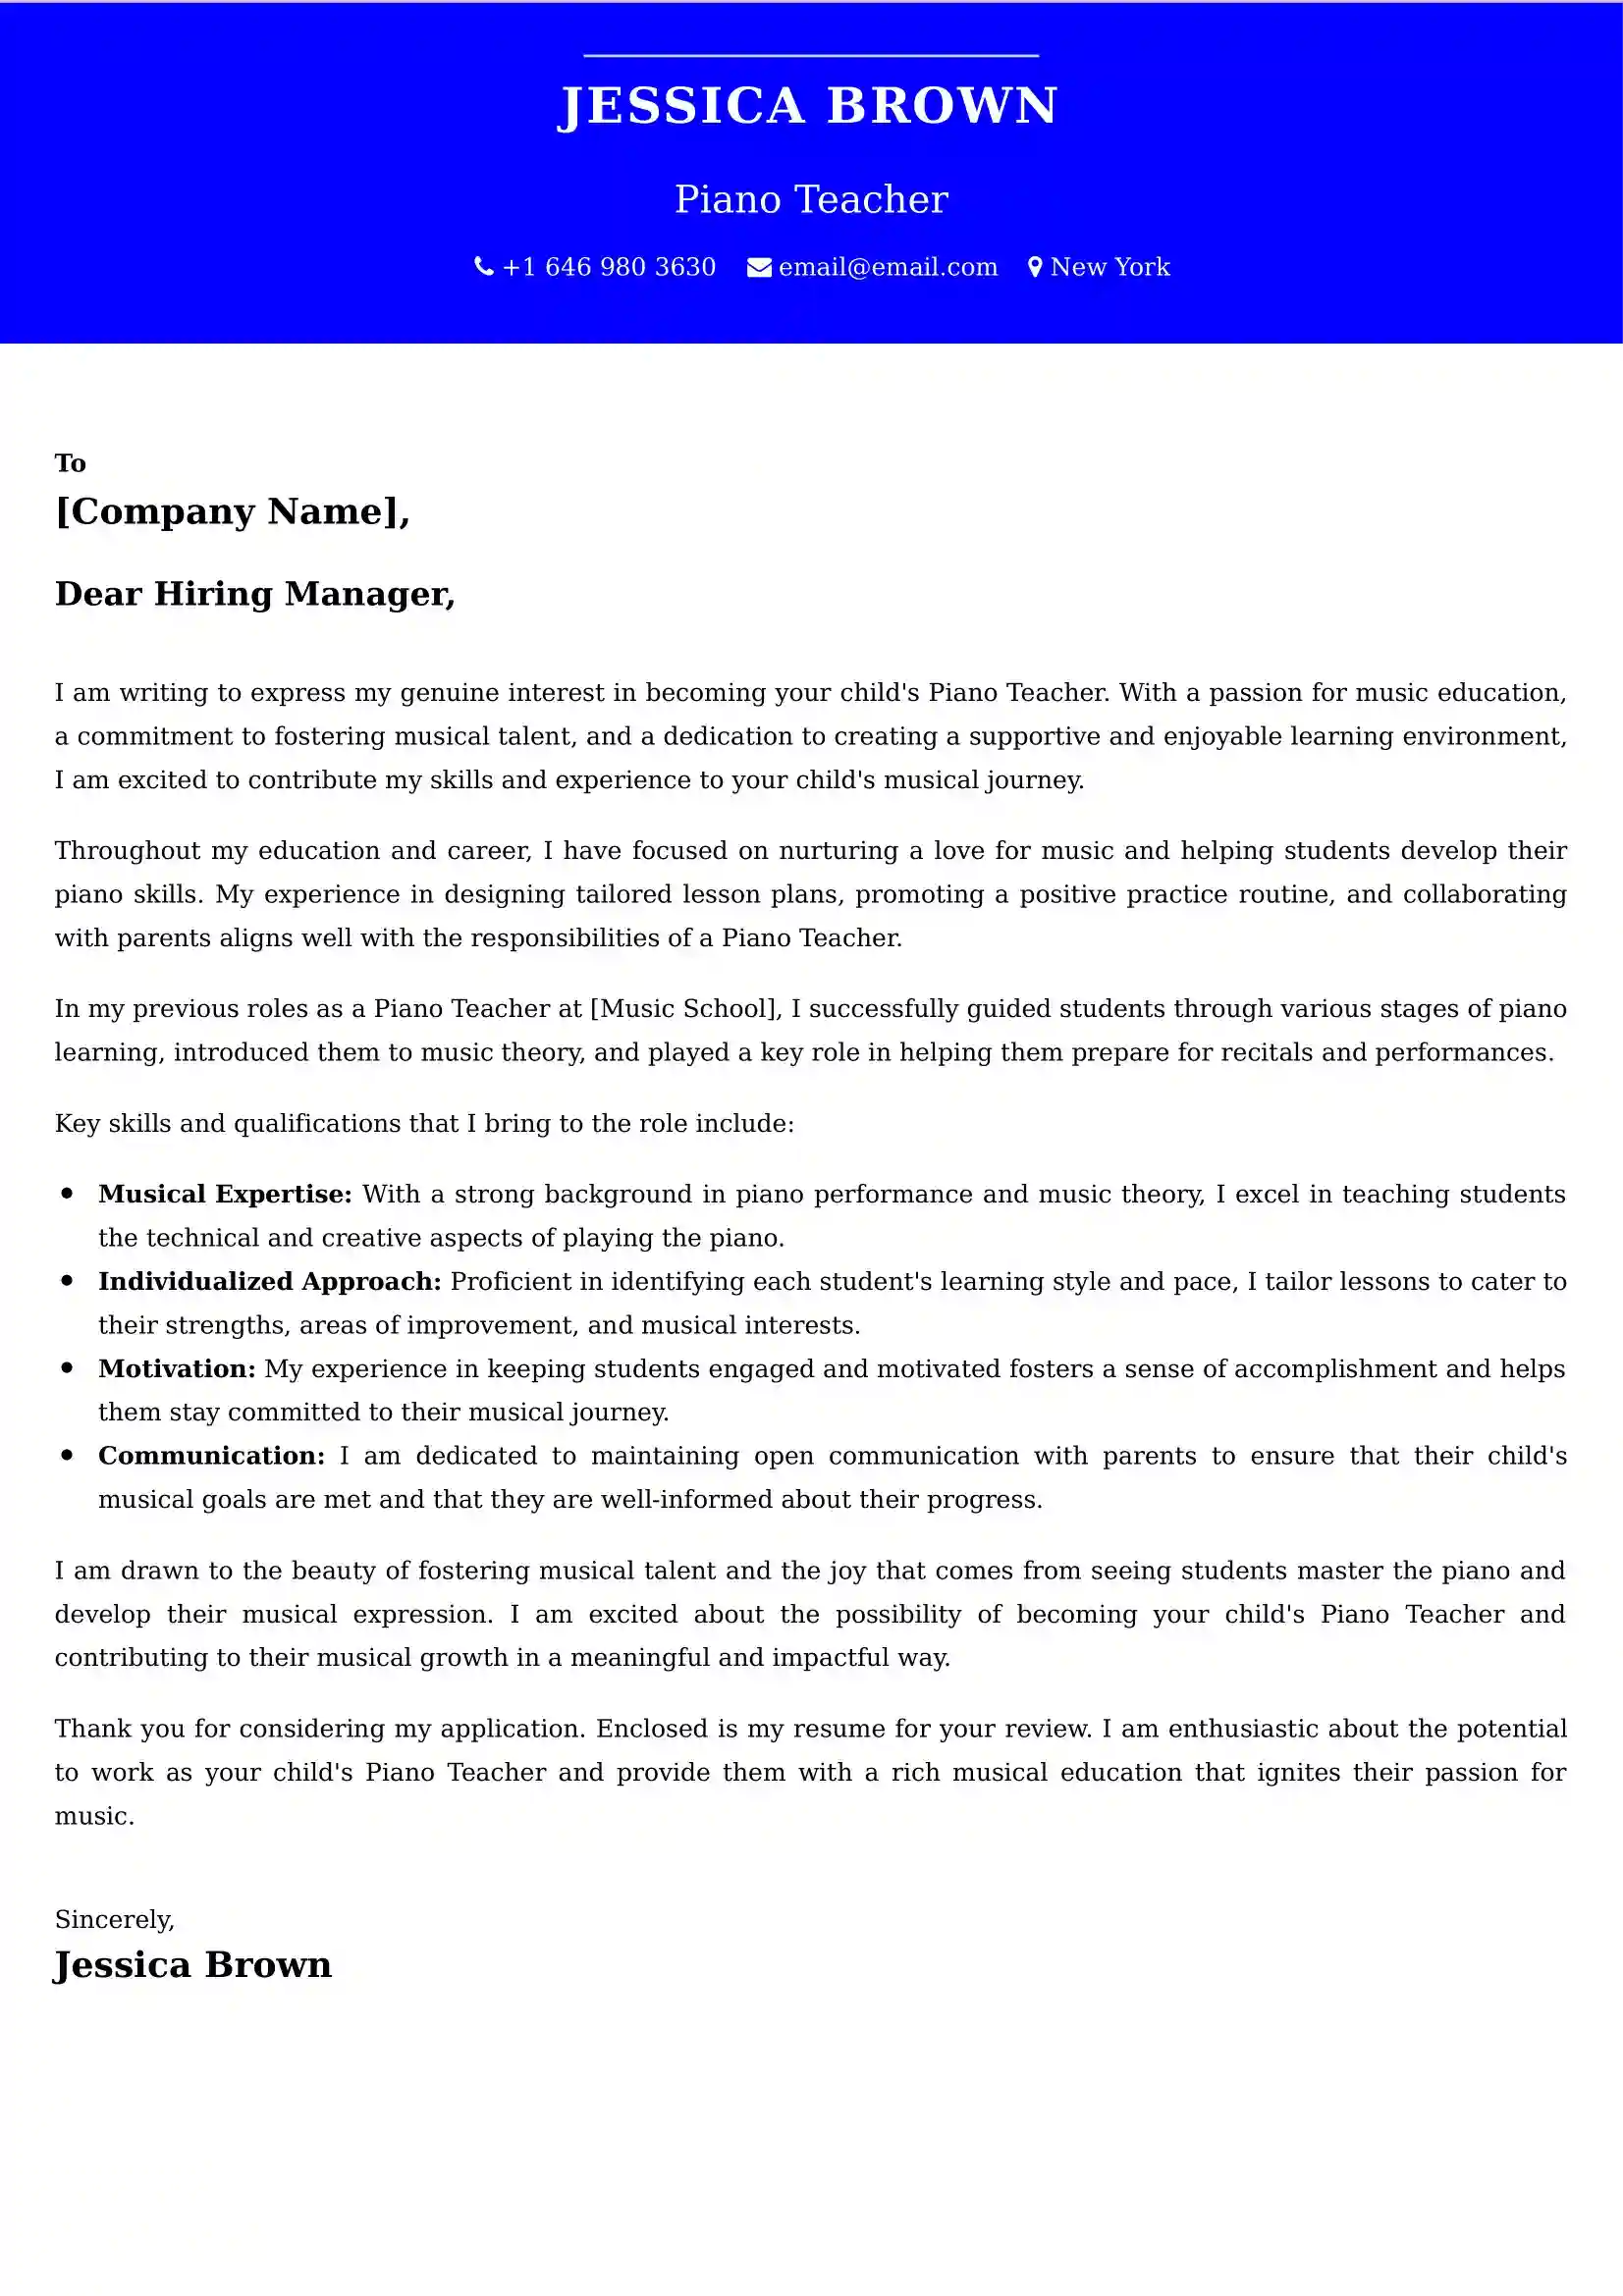 Piano Teacher Cover Letter Examples - Latest UK Format